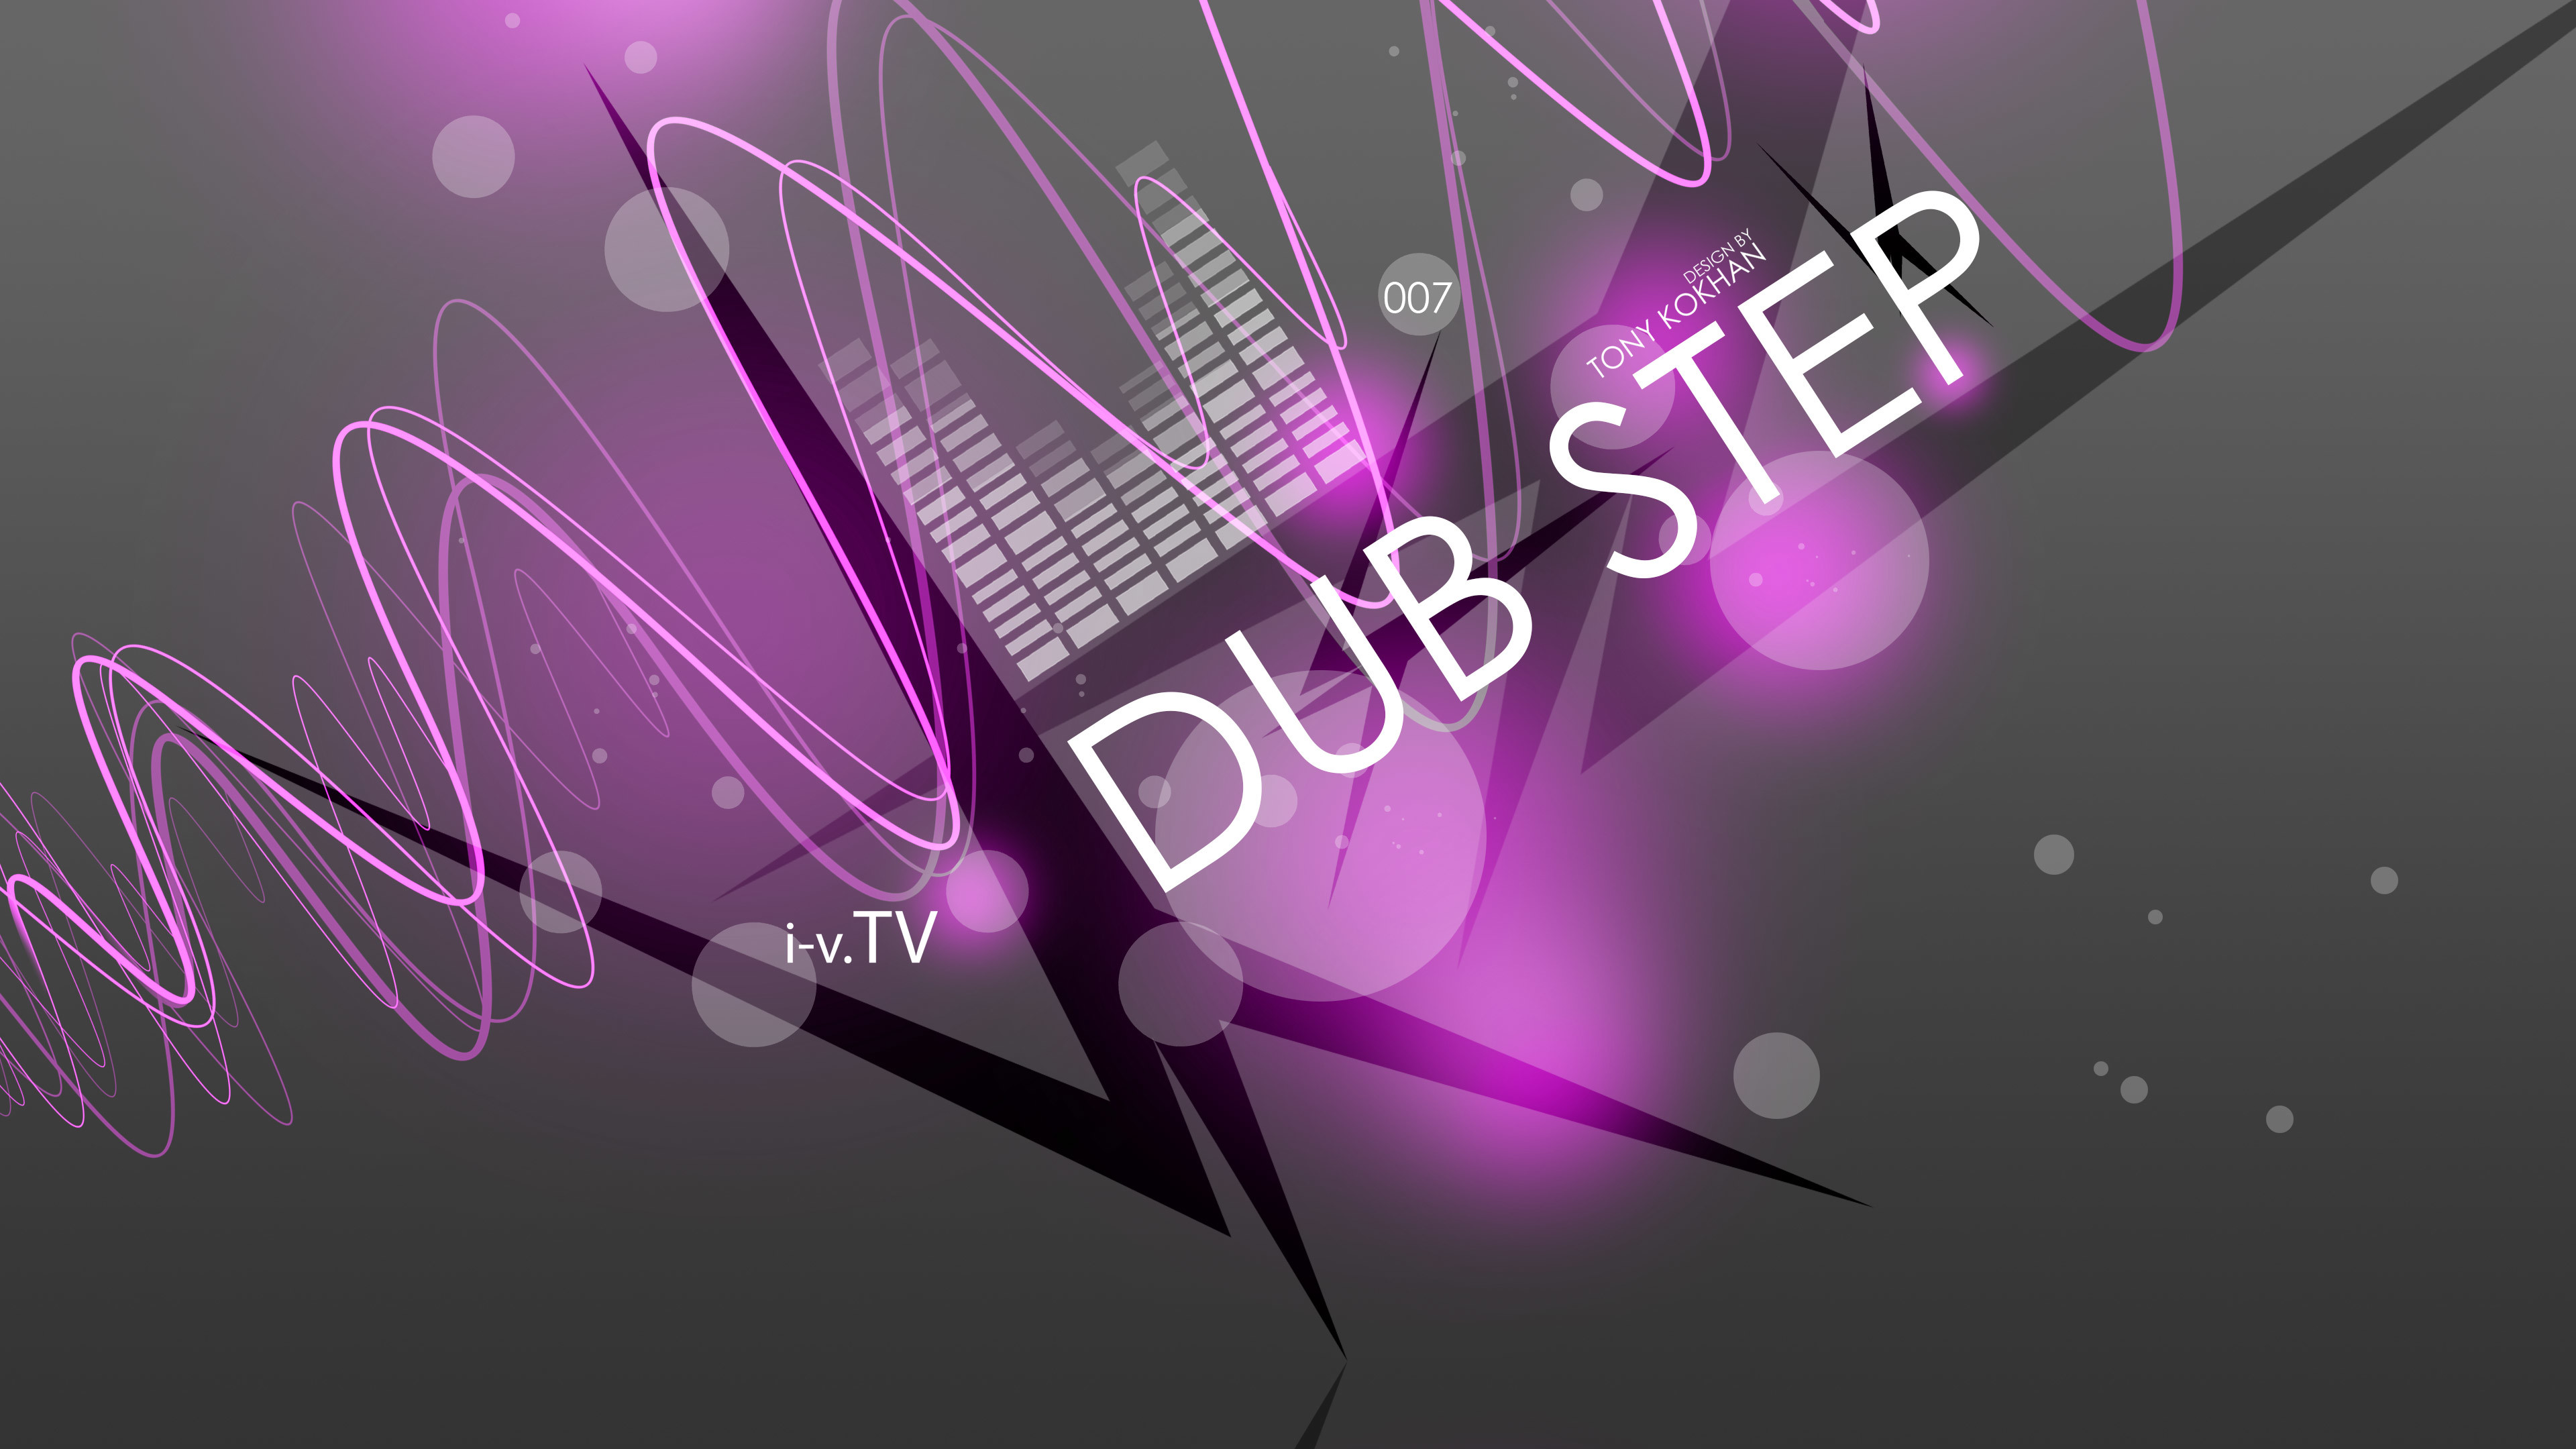 3840x2160 ... DubStep-Music-eQ-Simple-Creative-Seven-Abstract-Image- ...